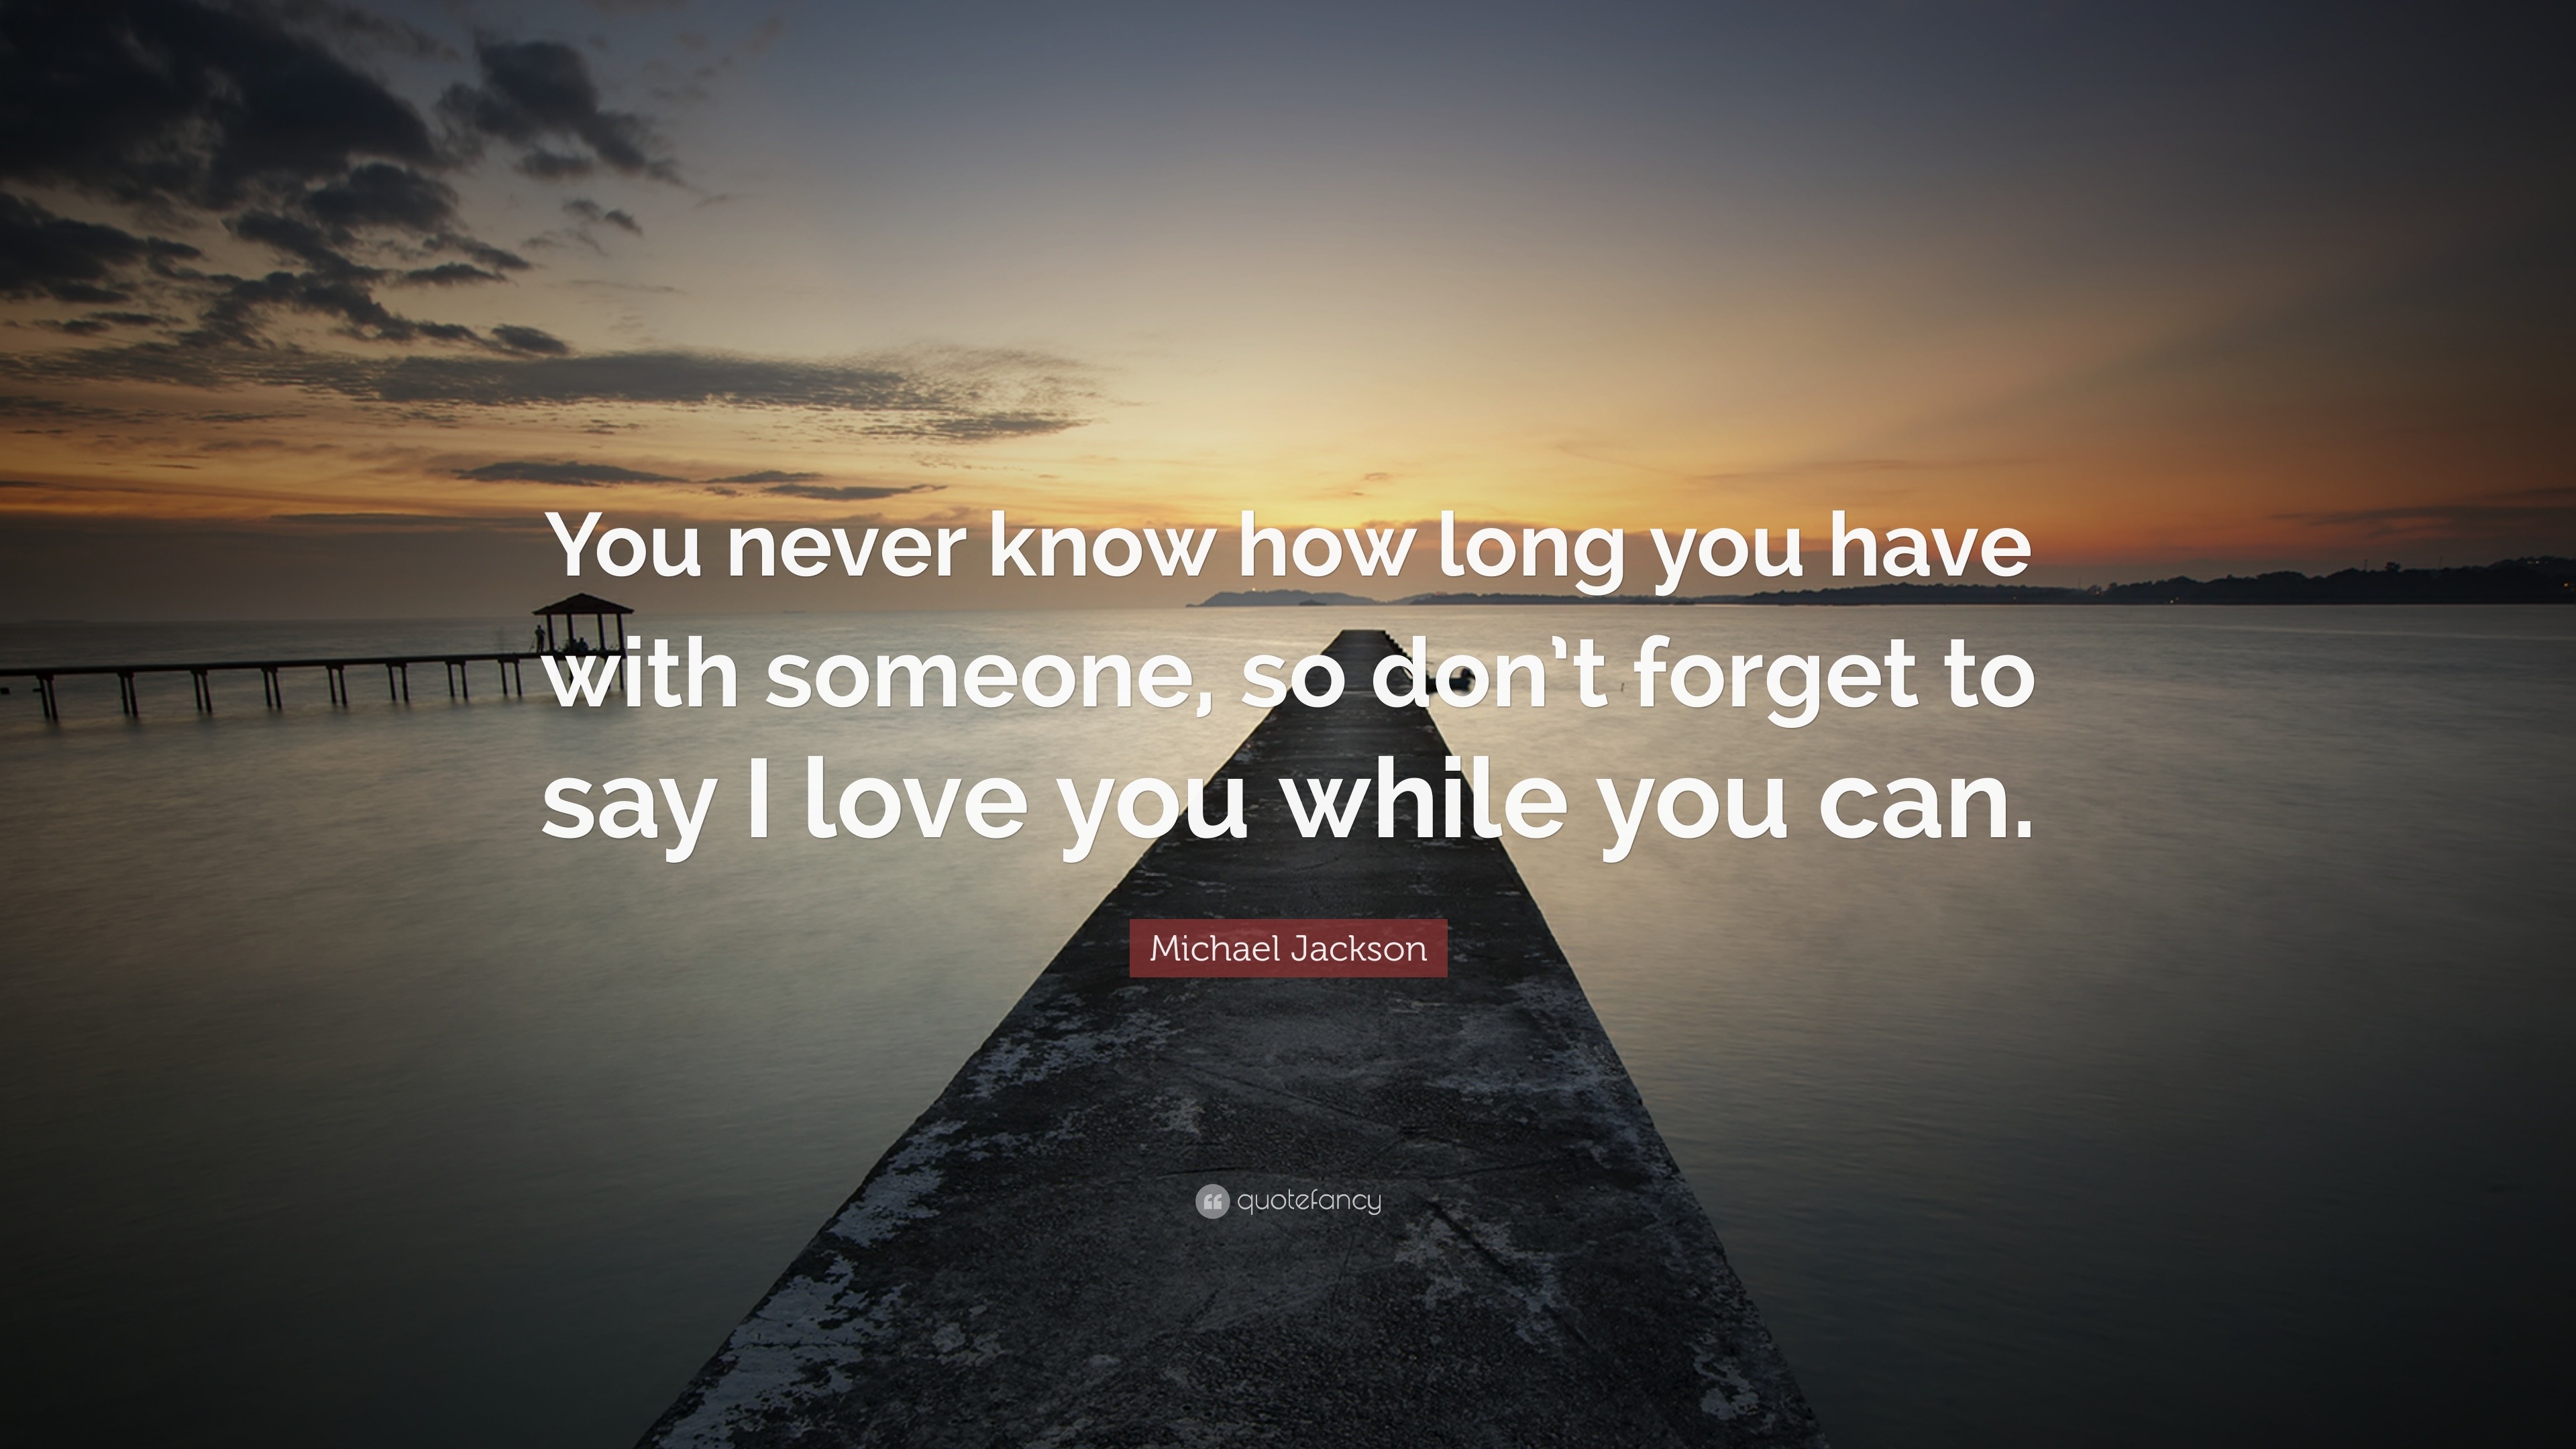 Michael Jackson Quote “You never know how long you have with someone so